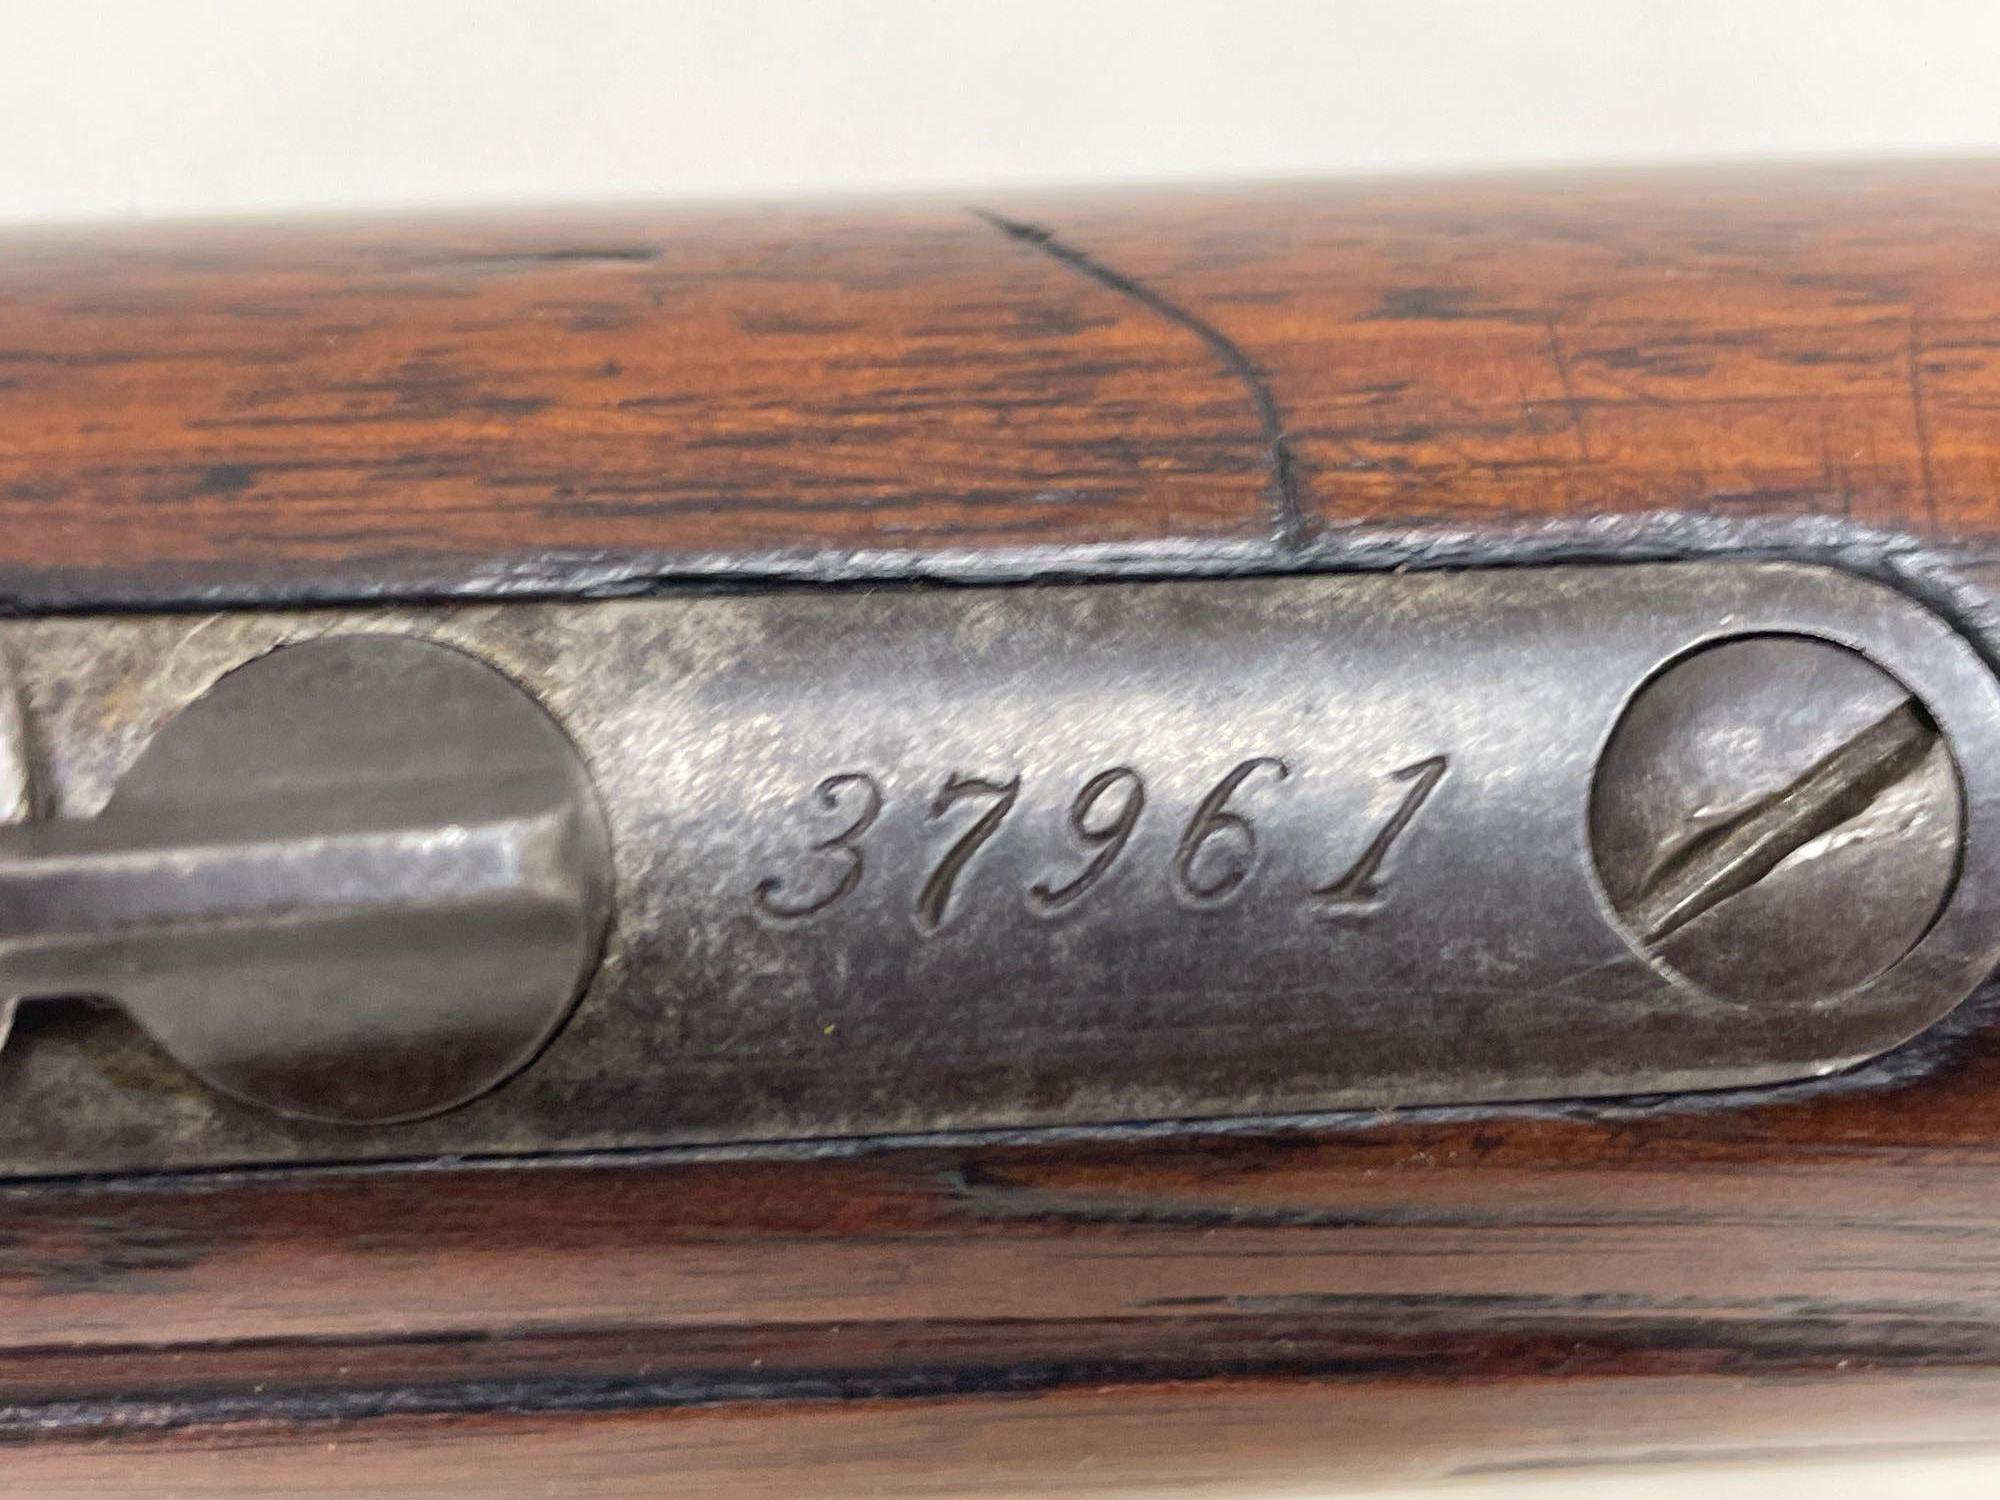 Winchester model 1876, 45-60 caliber. Year 1877. Antique rifle with octagon barrel. SN: 37961 Year